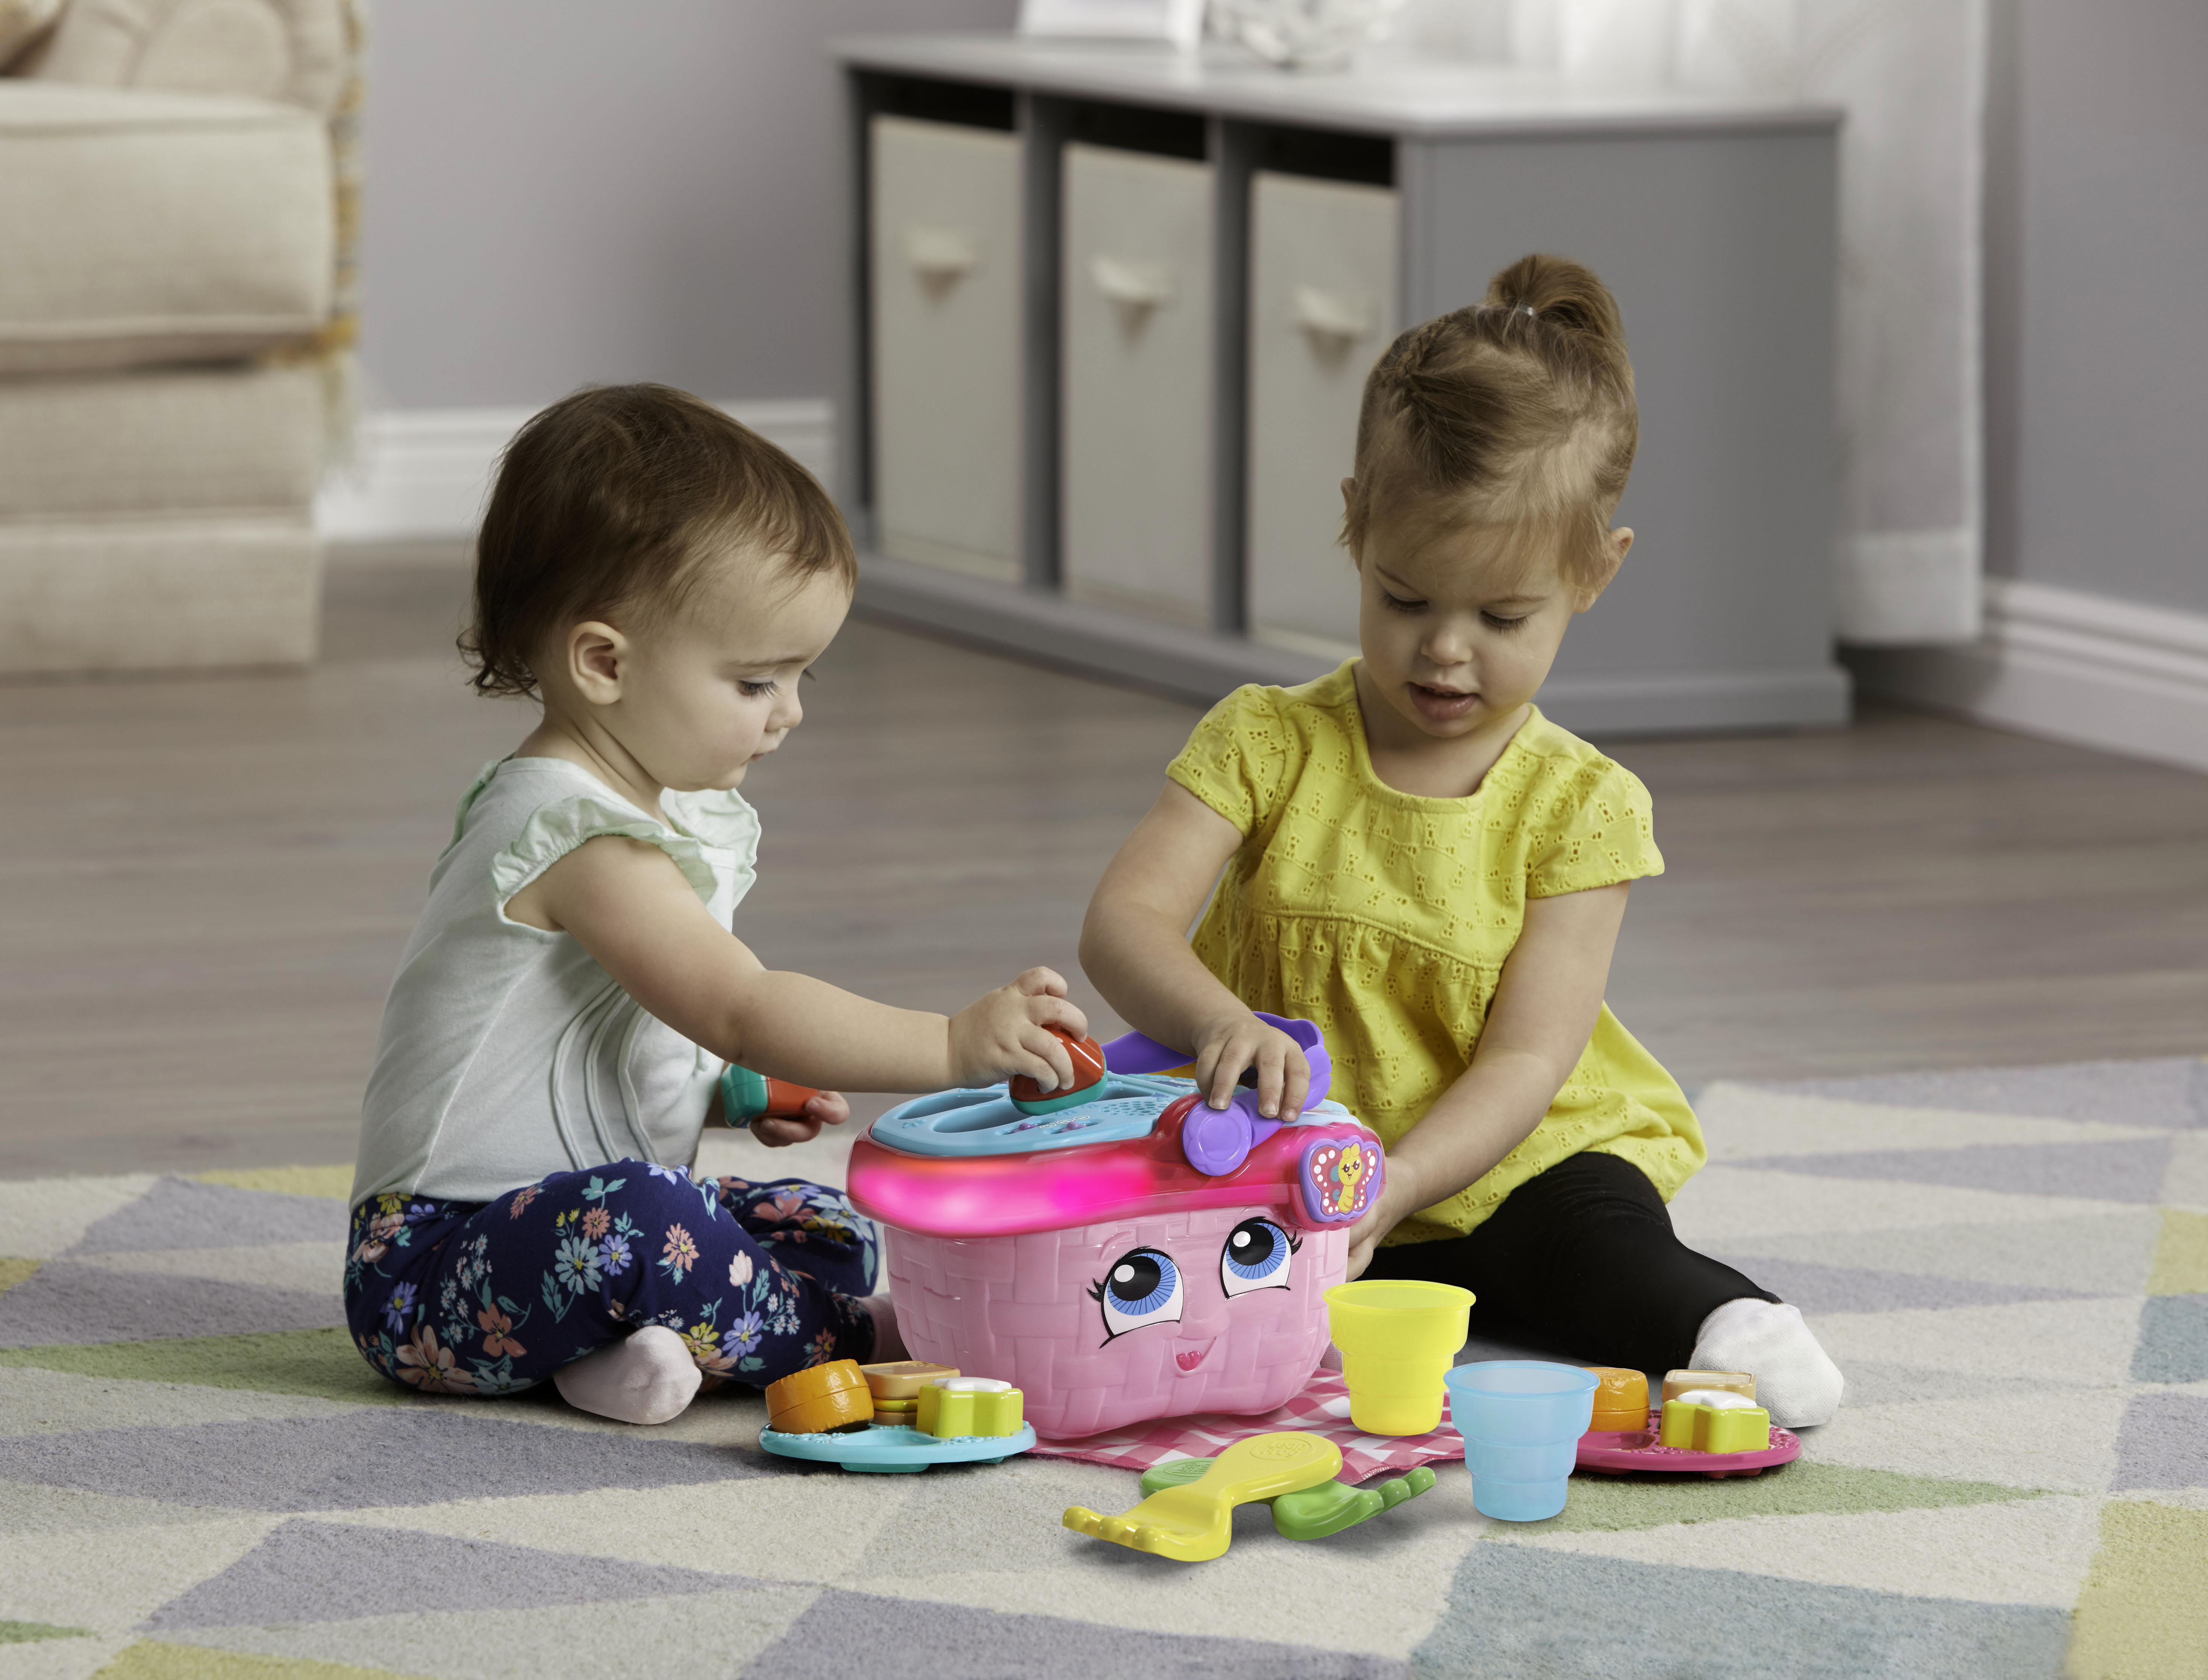 LeapFrog Shapes and Sharing Picnic Basket, Multicolor Role Play Toy for Infants - image 3 of 12